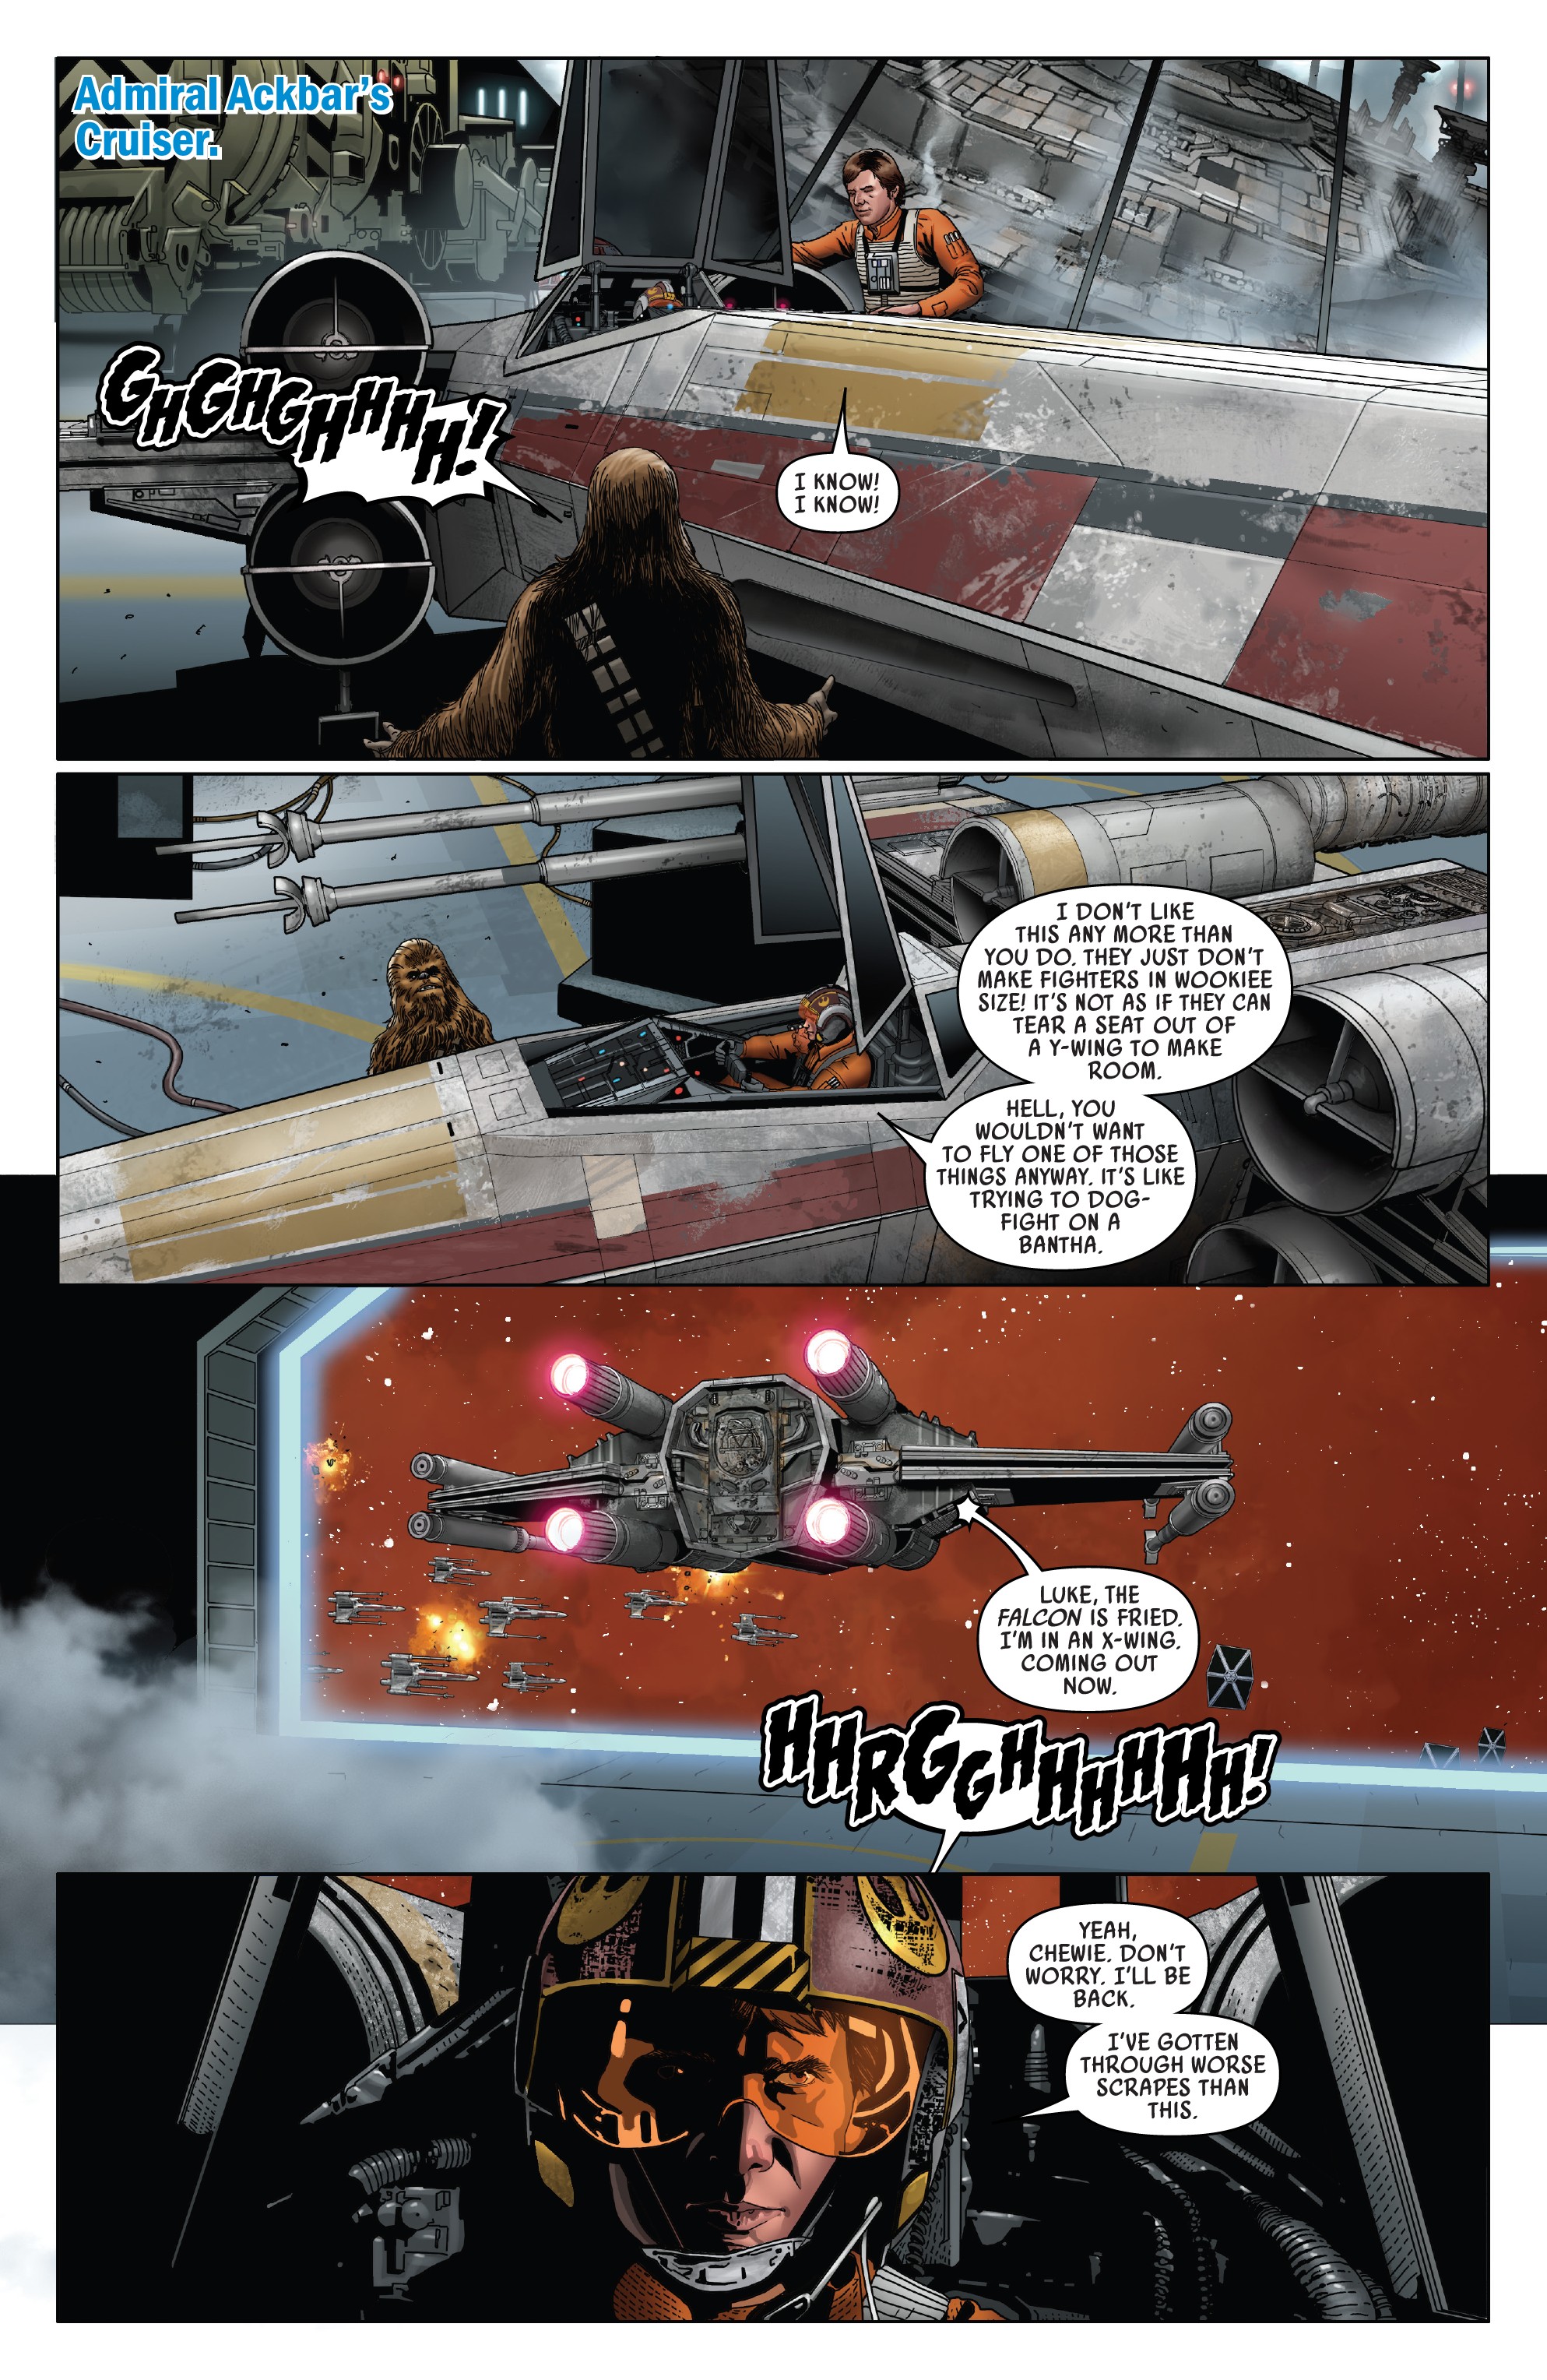 Star Wars (2015-): Chapter 54 - Page 3